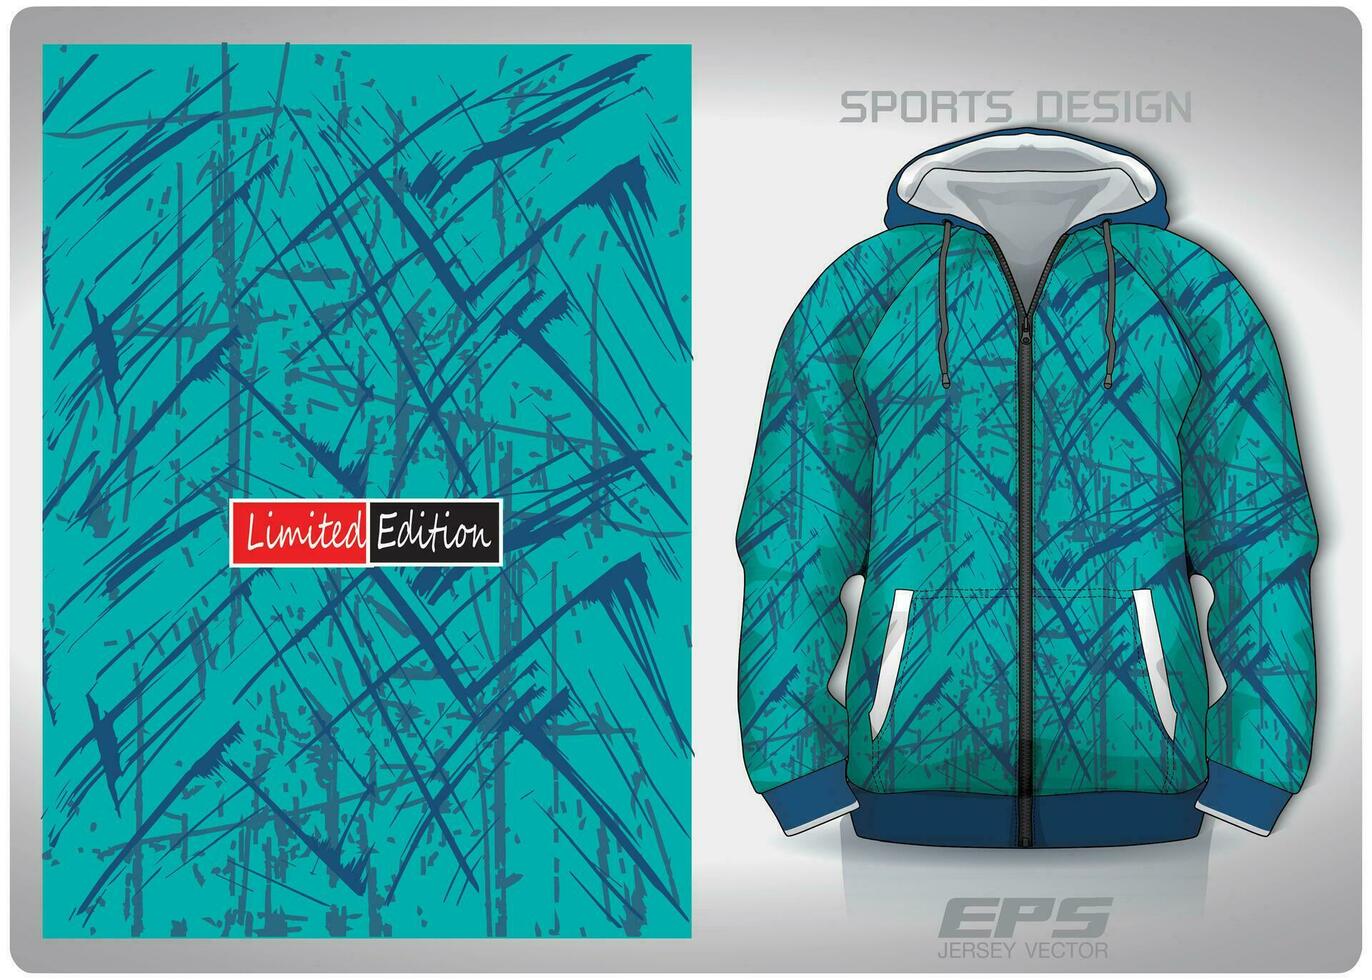 Vector sports shirt background image.mint green color salad art pattern design, illustration, textile background for sports long sleeve hoodie, jersey hoodie